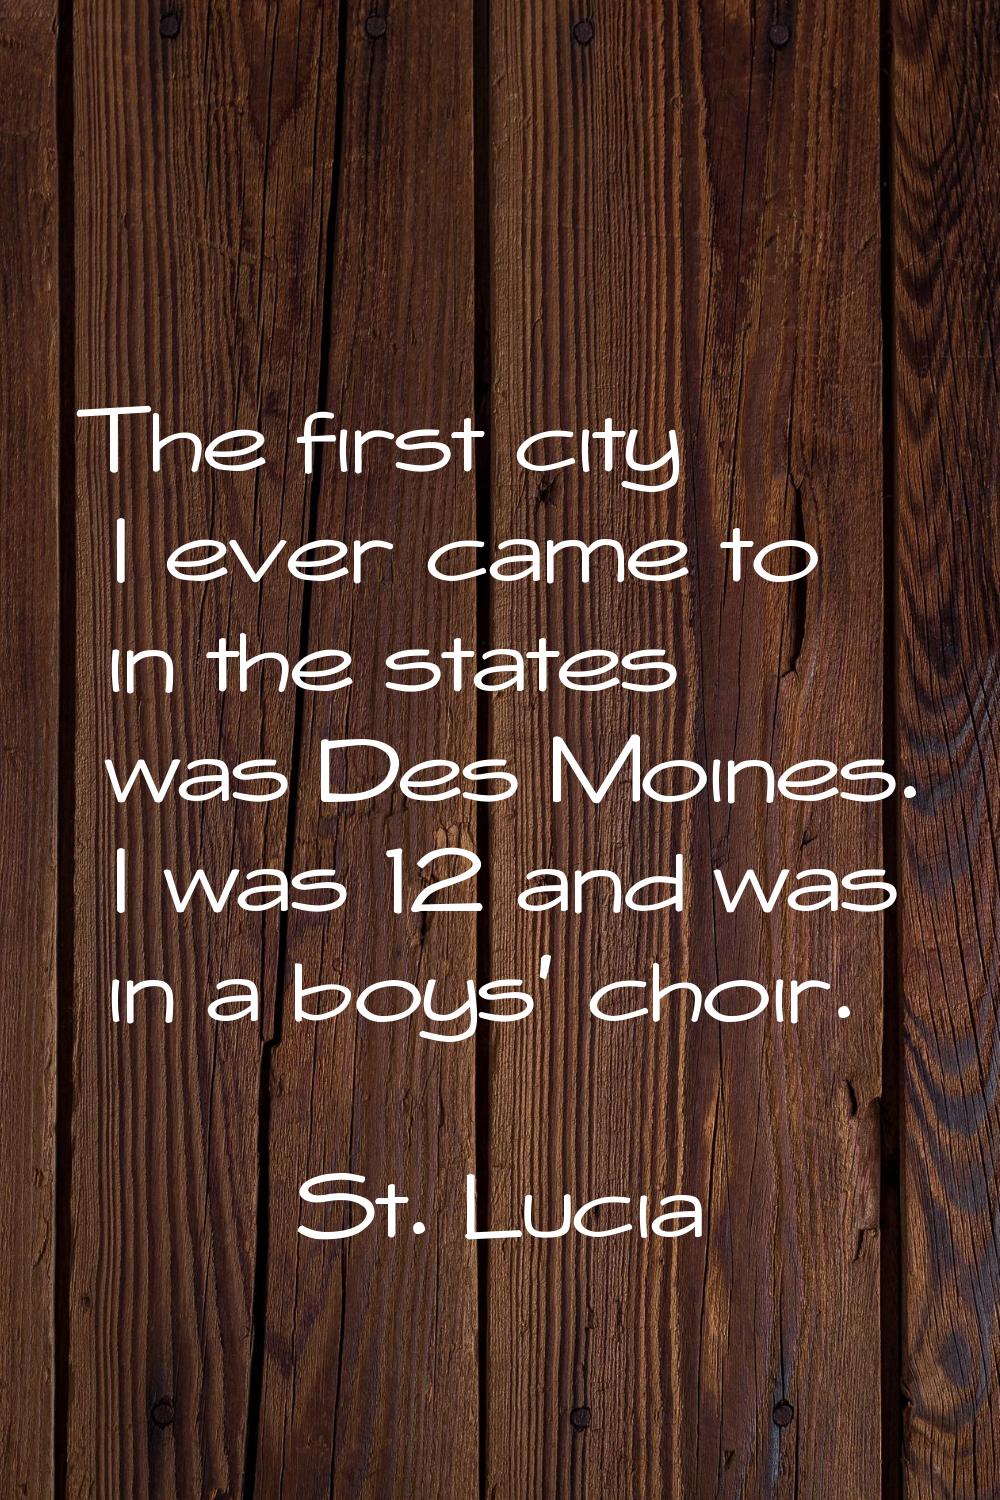 The first city I ever came to in the states was Des Moines. I was 12 and was in a boys' choir.